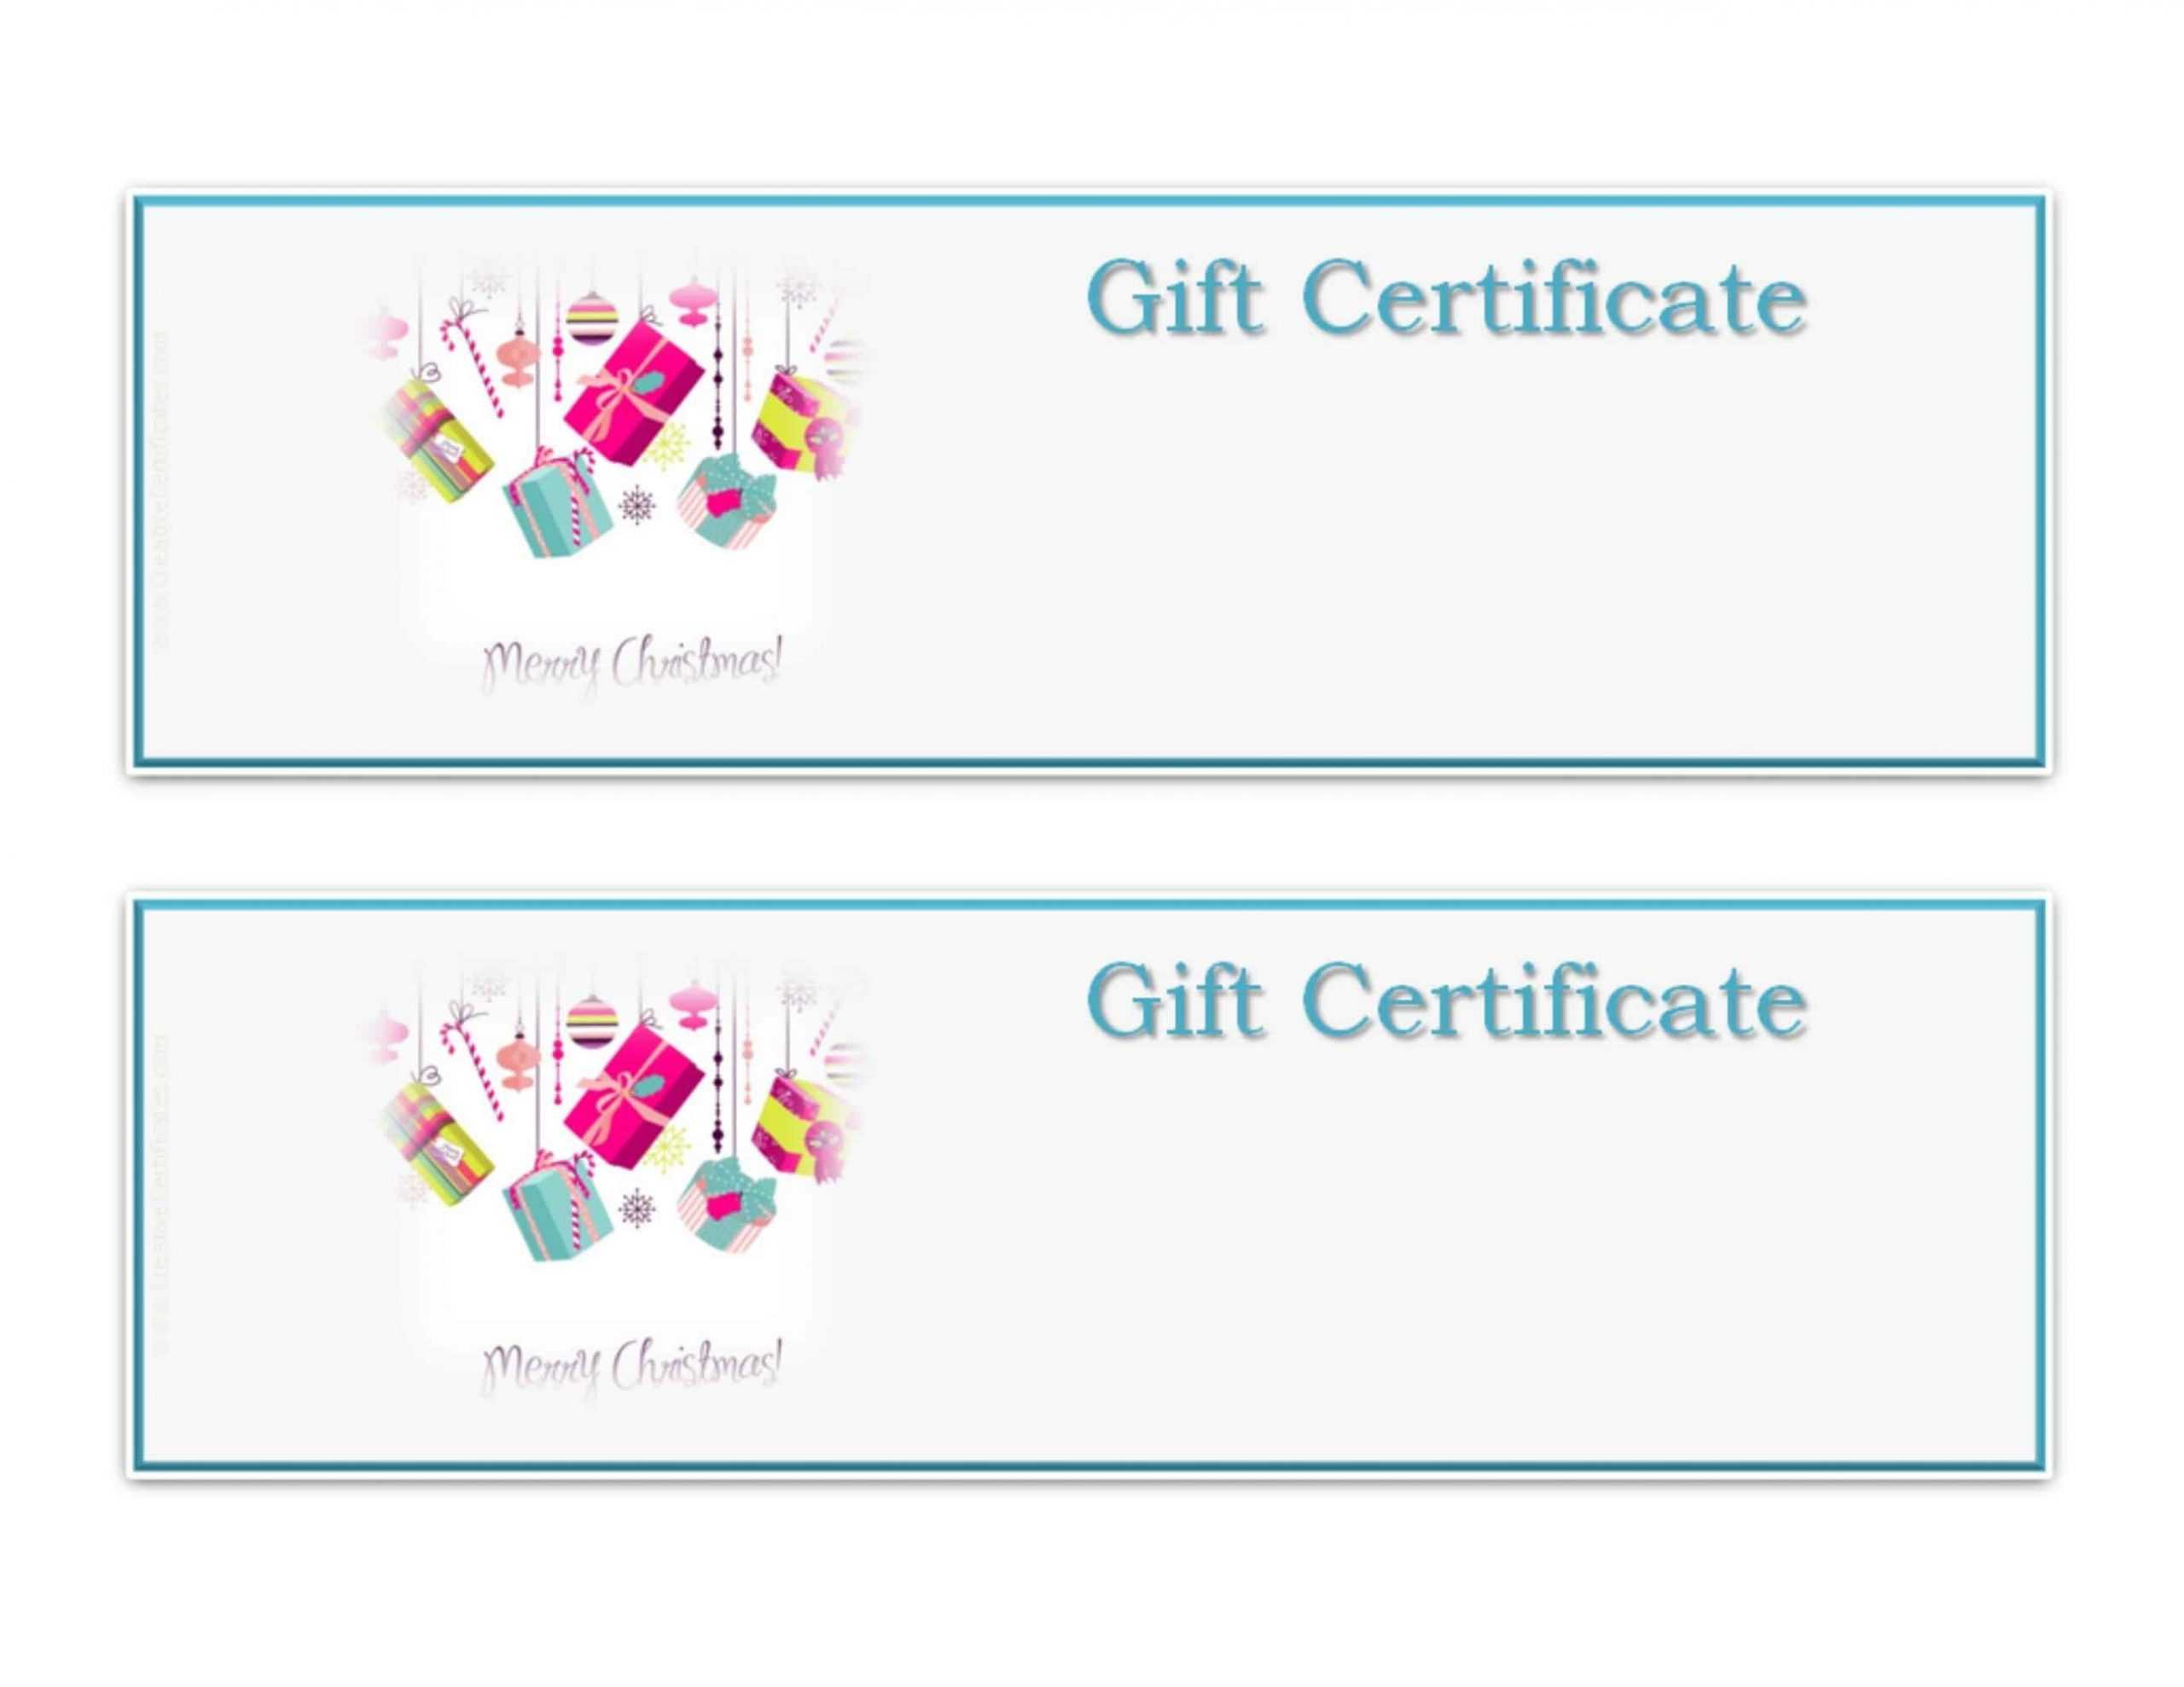 Gift Certificate Templates To Print For Free | 101 Activity Regarding Merry Christmas Gift Certificate Templates